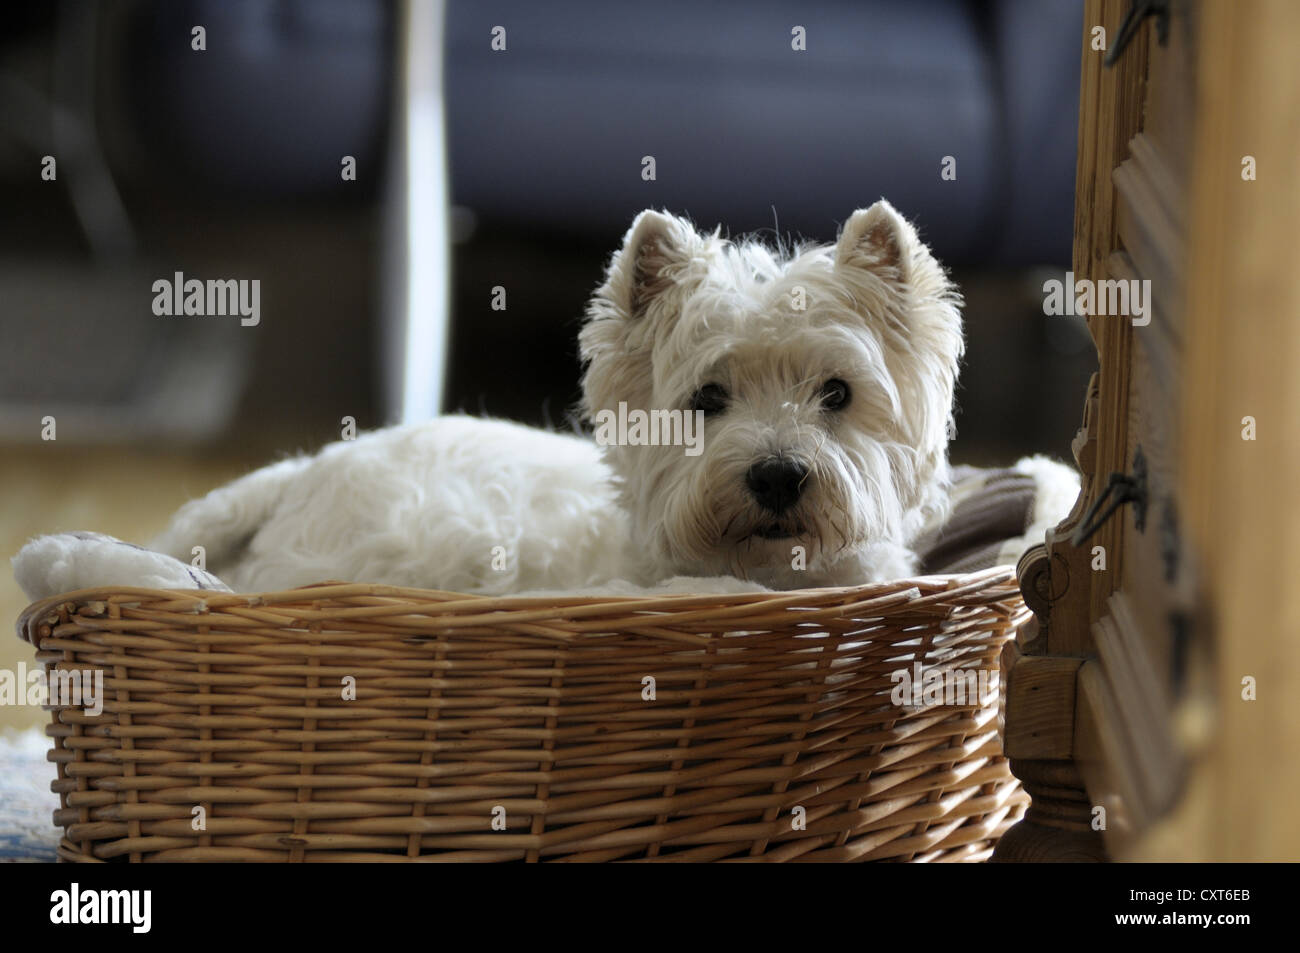 West Highland Terrier lying in a basket Stock Photo